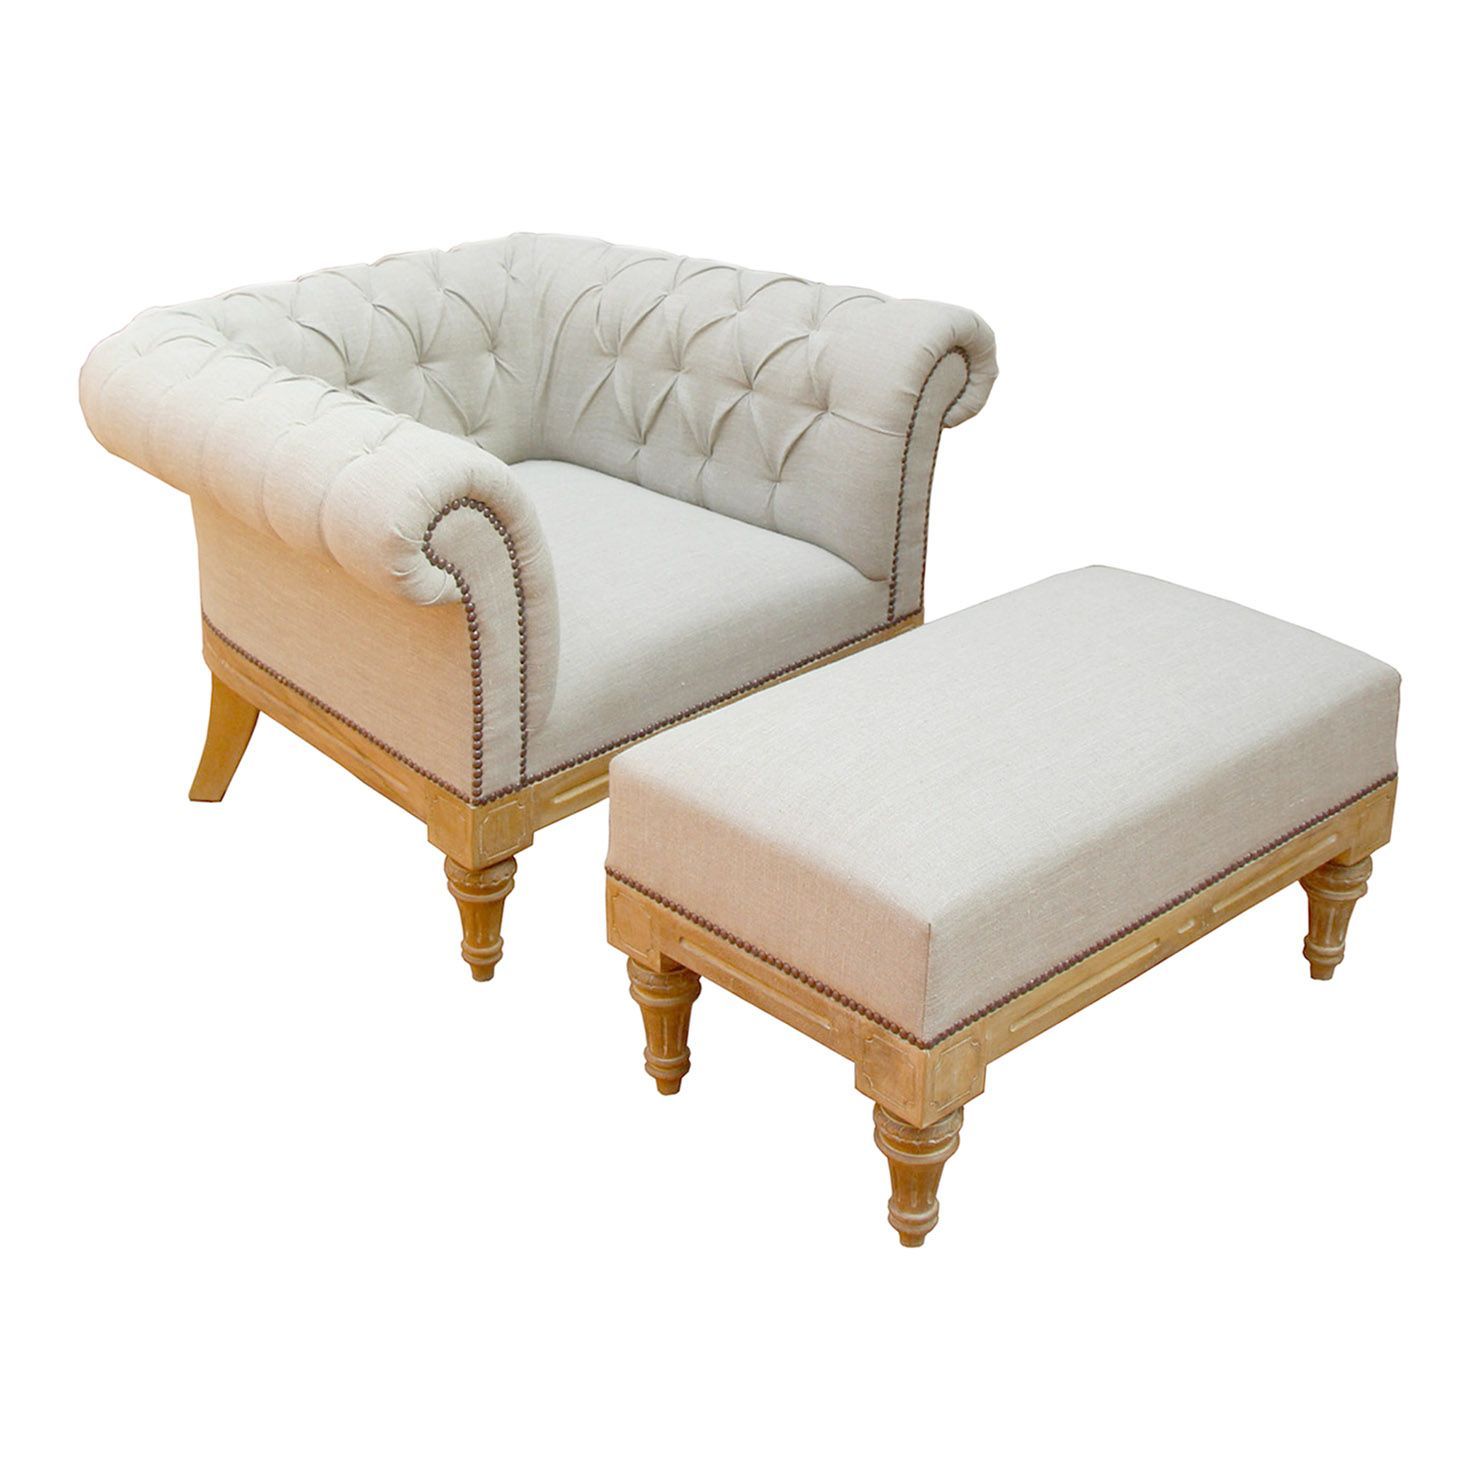 White Armchair With Ottoman Inside Michalak Cheswood Armchairs And Ottoman (View 14 of 15)